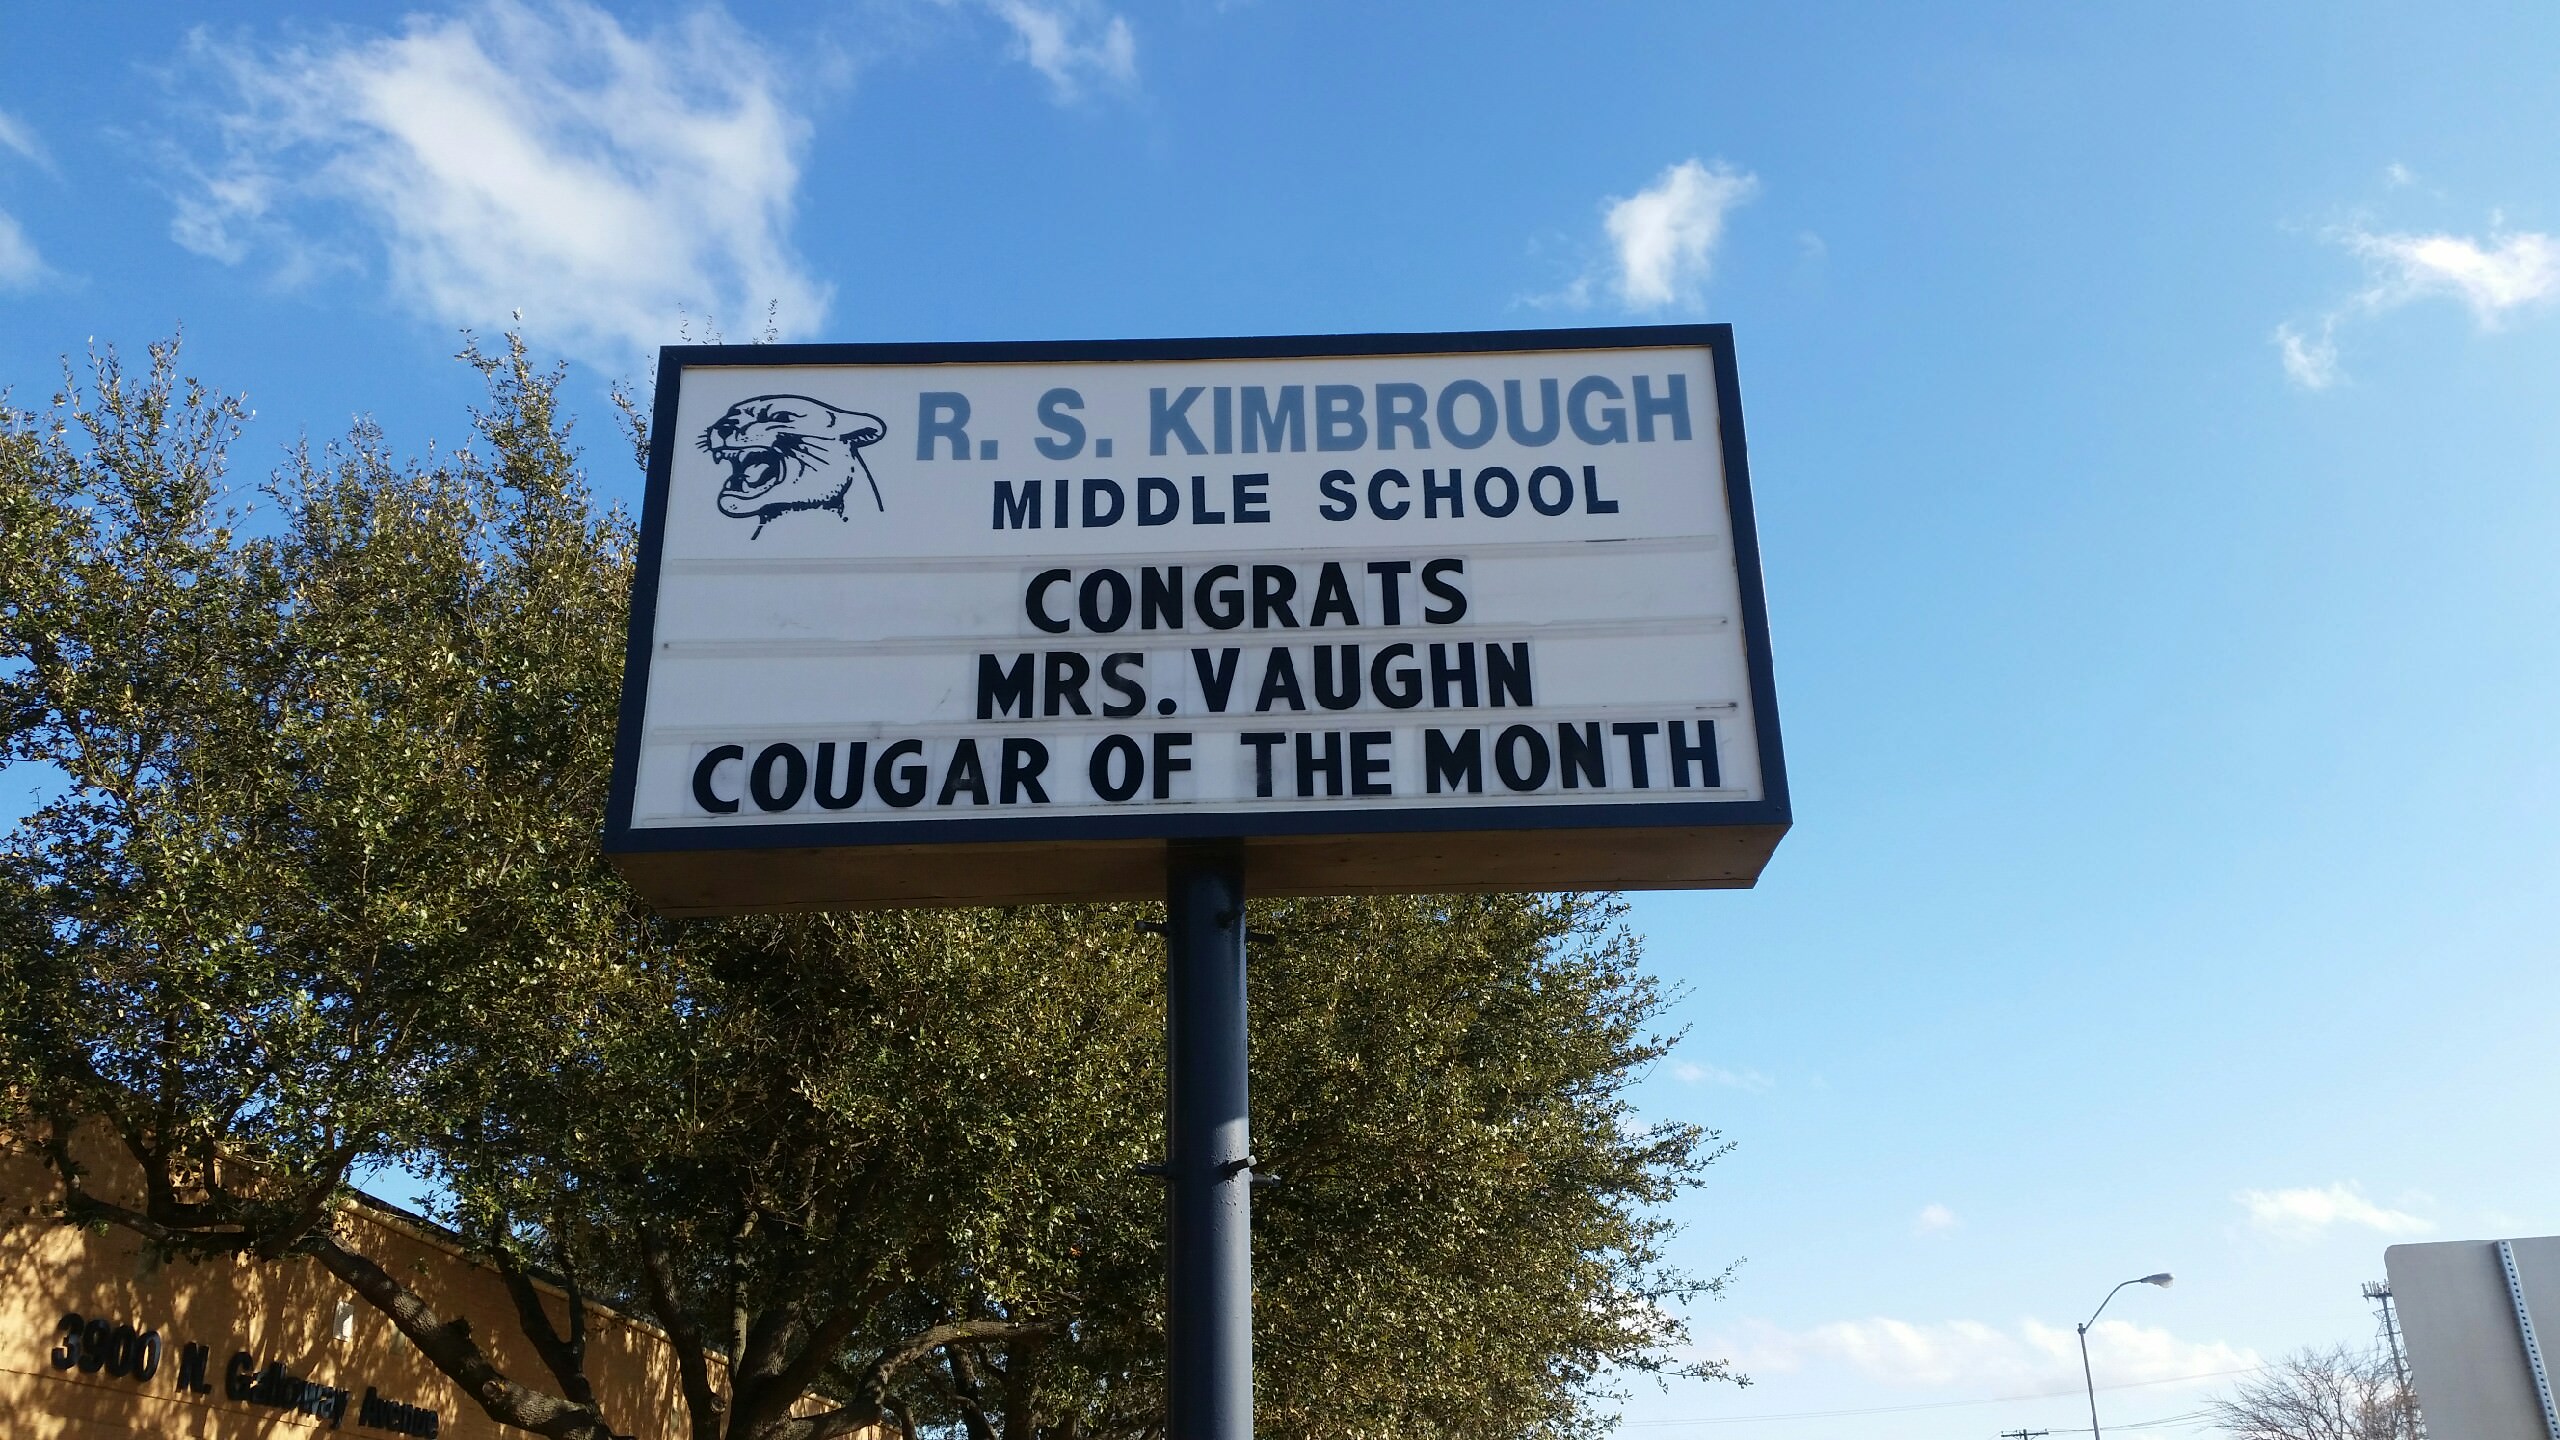 cougar of the month meme - R. S. Kimbrough Middle School Congrats Mrs. Vaughn Cougar Of The Month